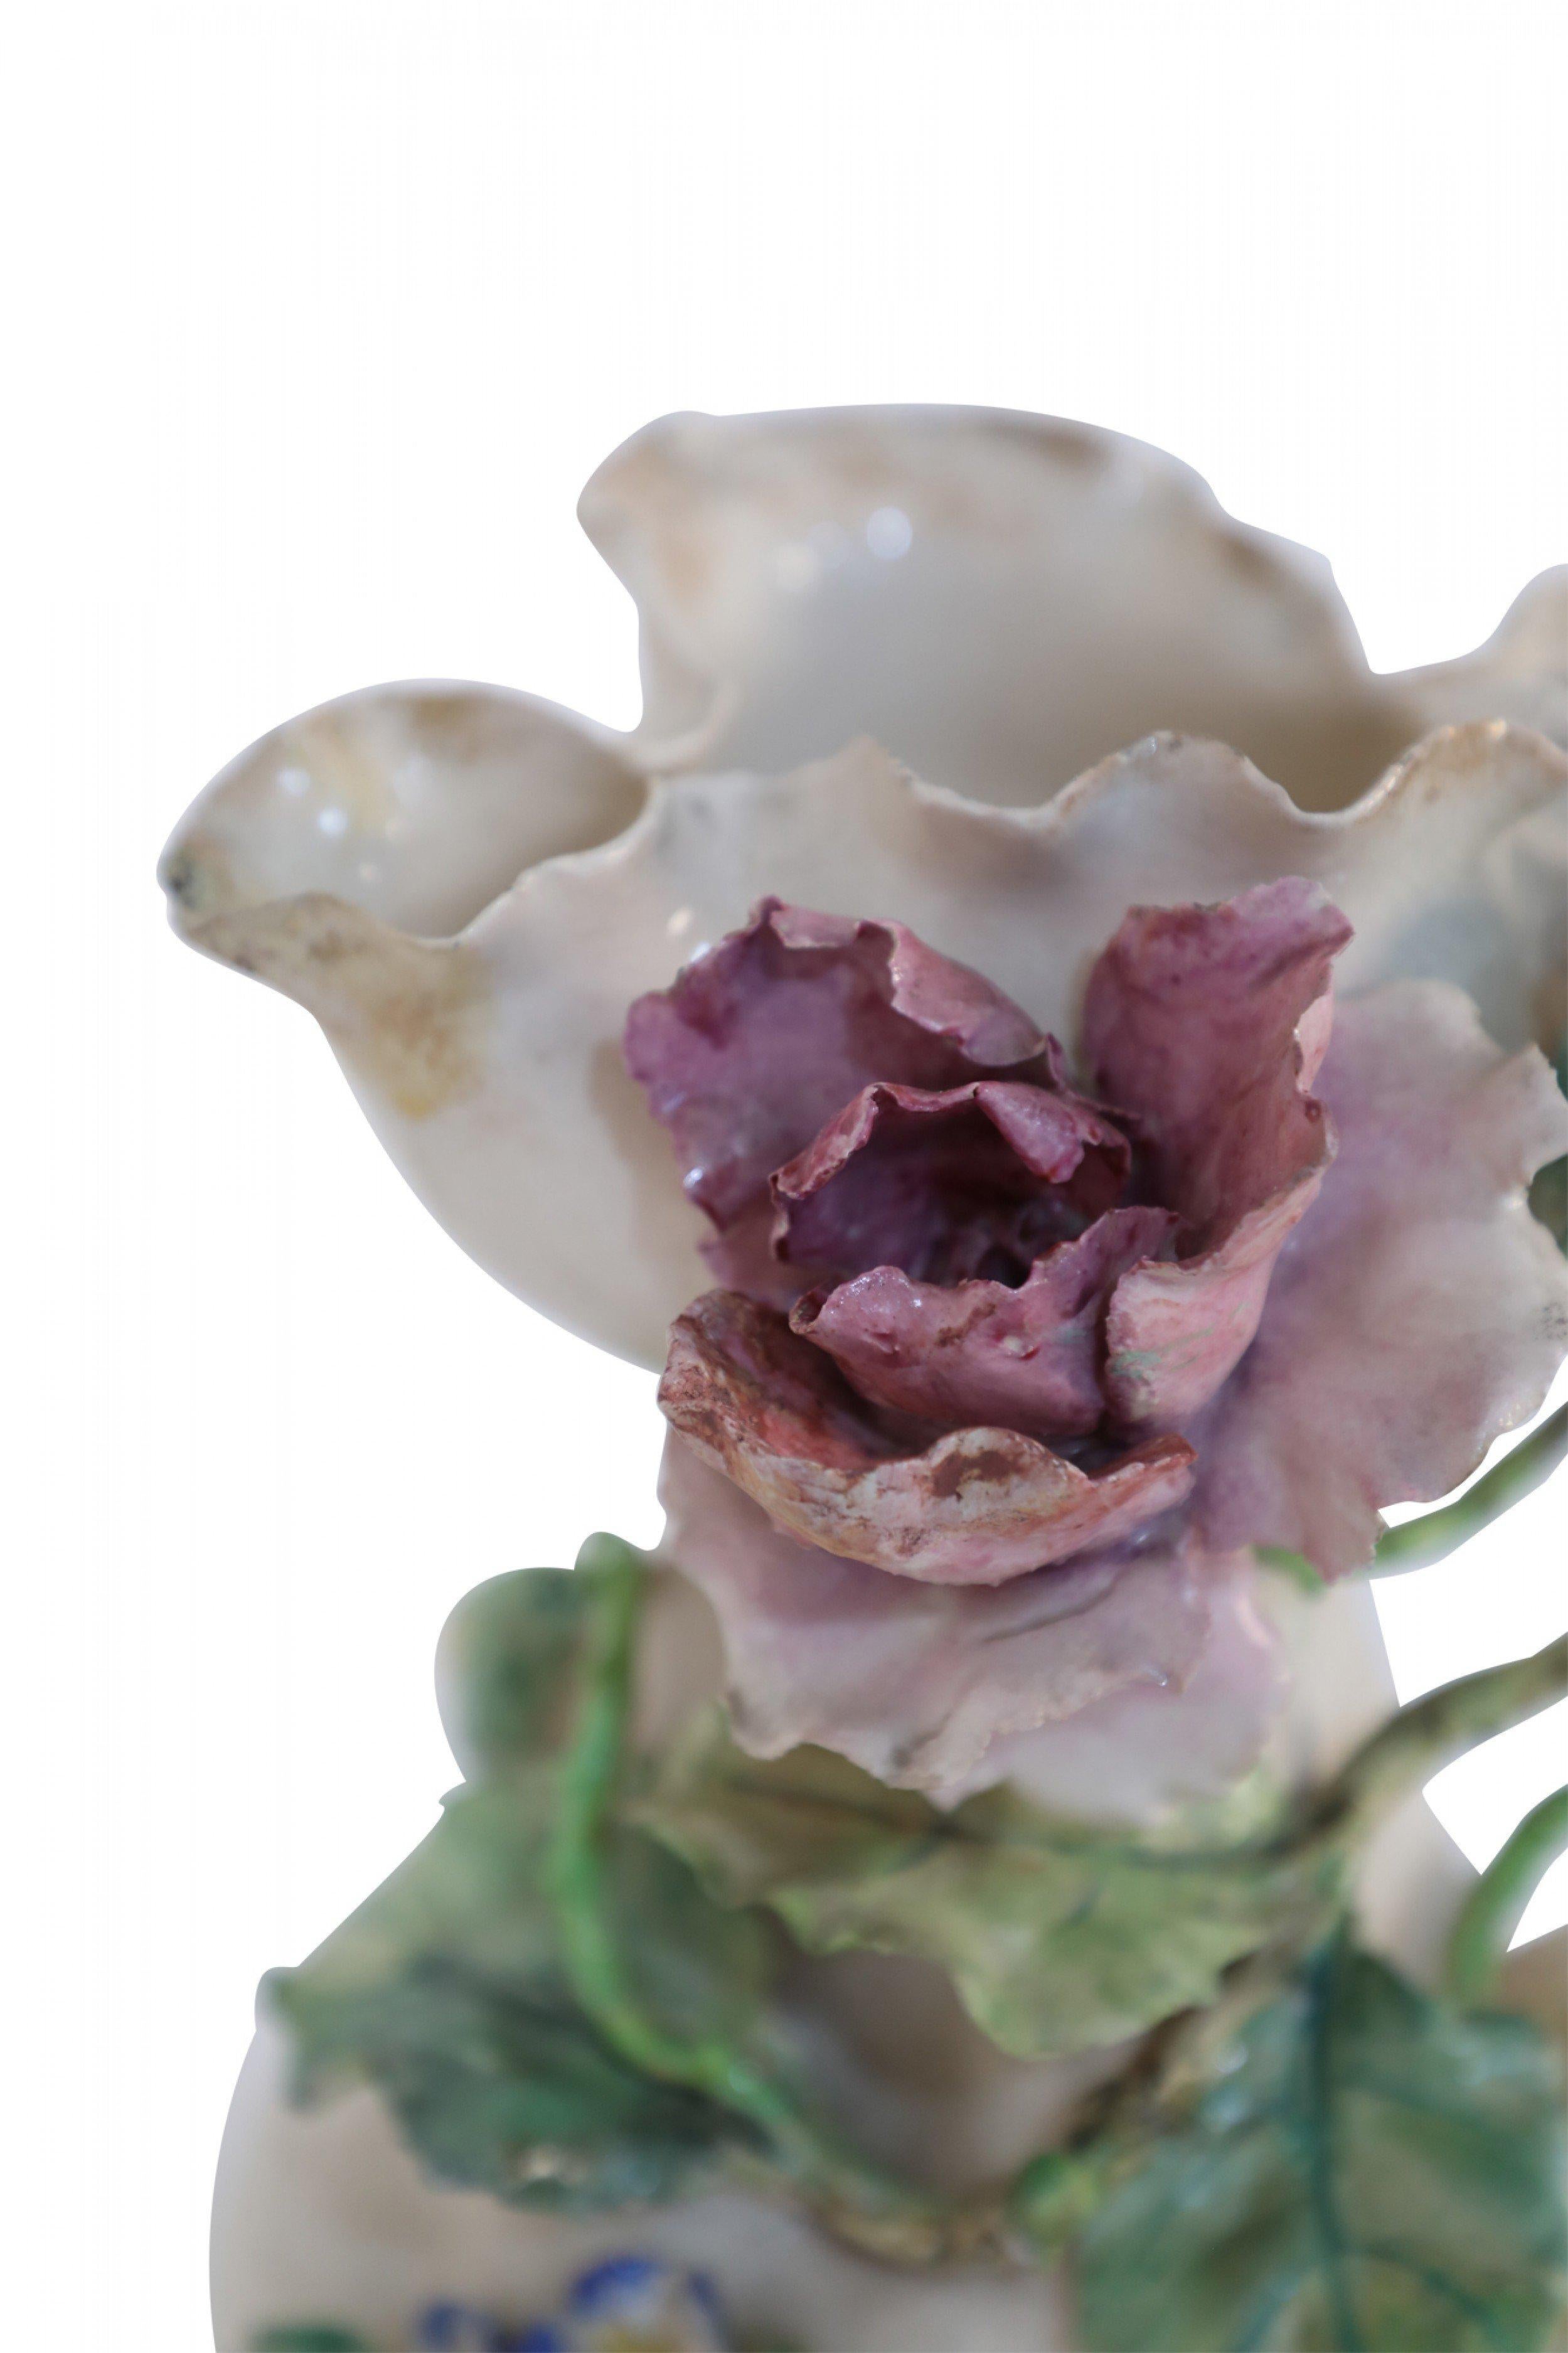 Late 19th Century French Victorian Porcelain Sculptural Rose Vase For Sale 5